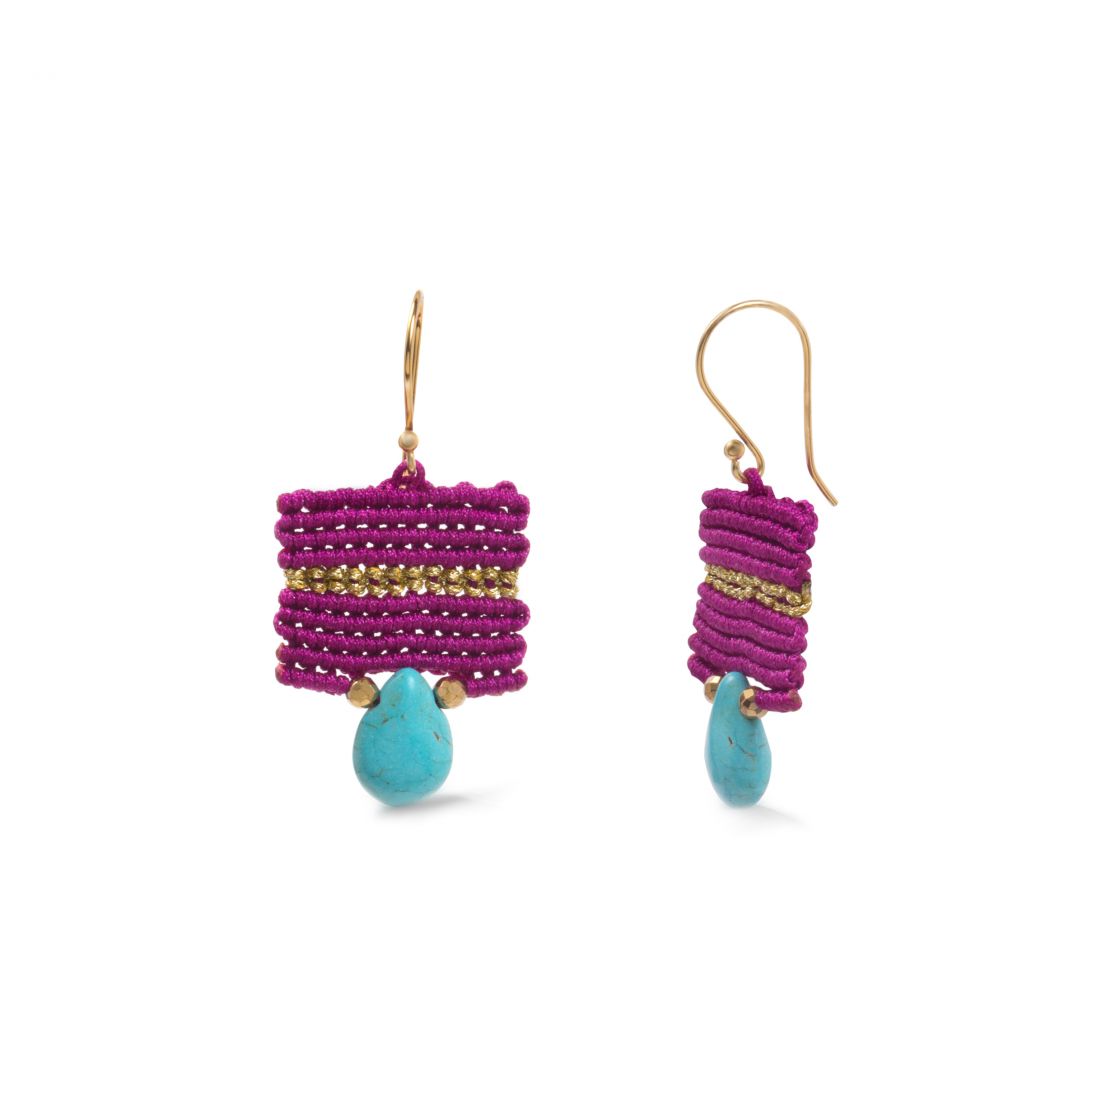 Handcrafted colorful, macrame, dangle Earrings with semiprecious stones. Simultaneously modern and earthy these unique earrings will add a bohemian touch to your outfit.